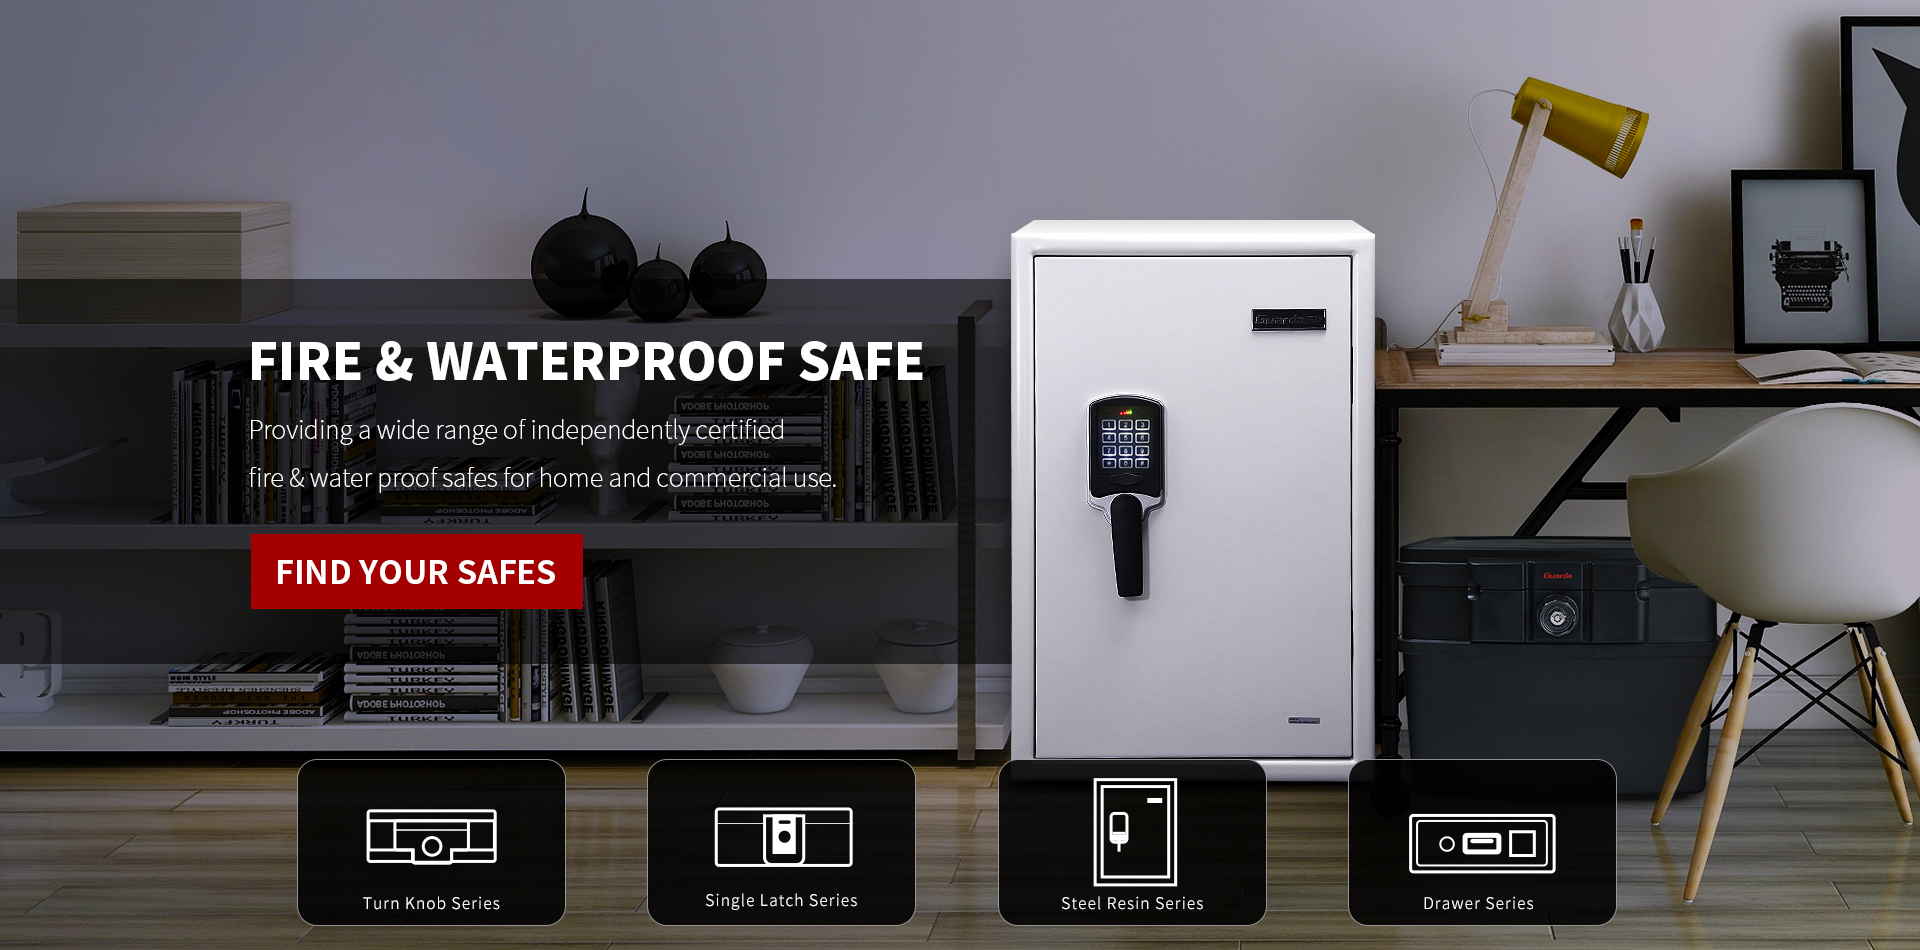 Fire and waterproof safes